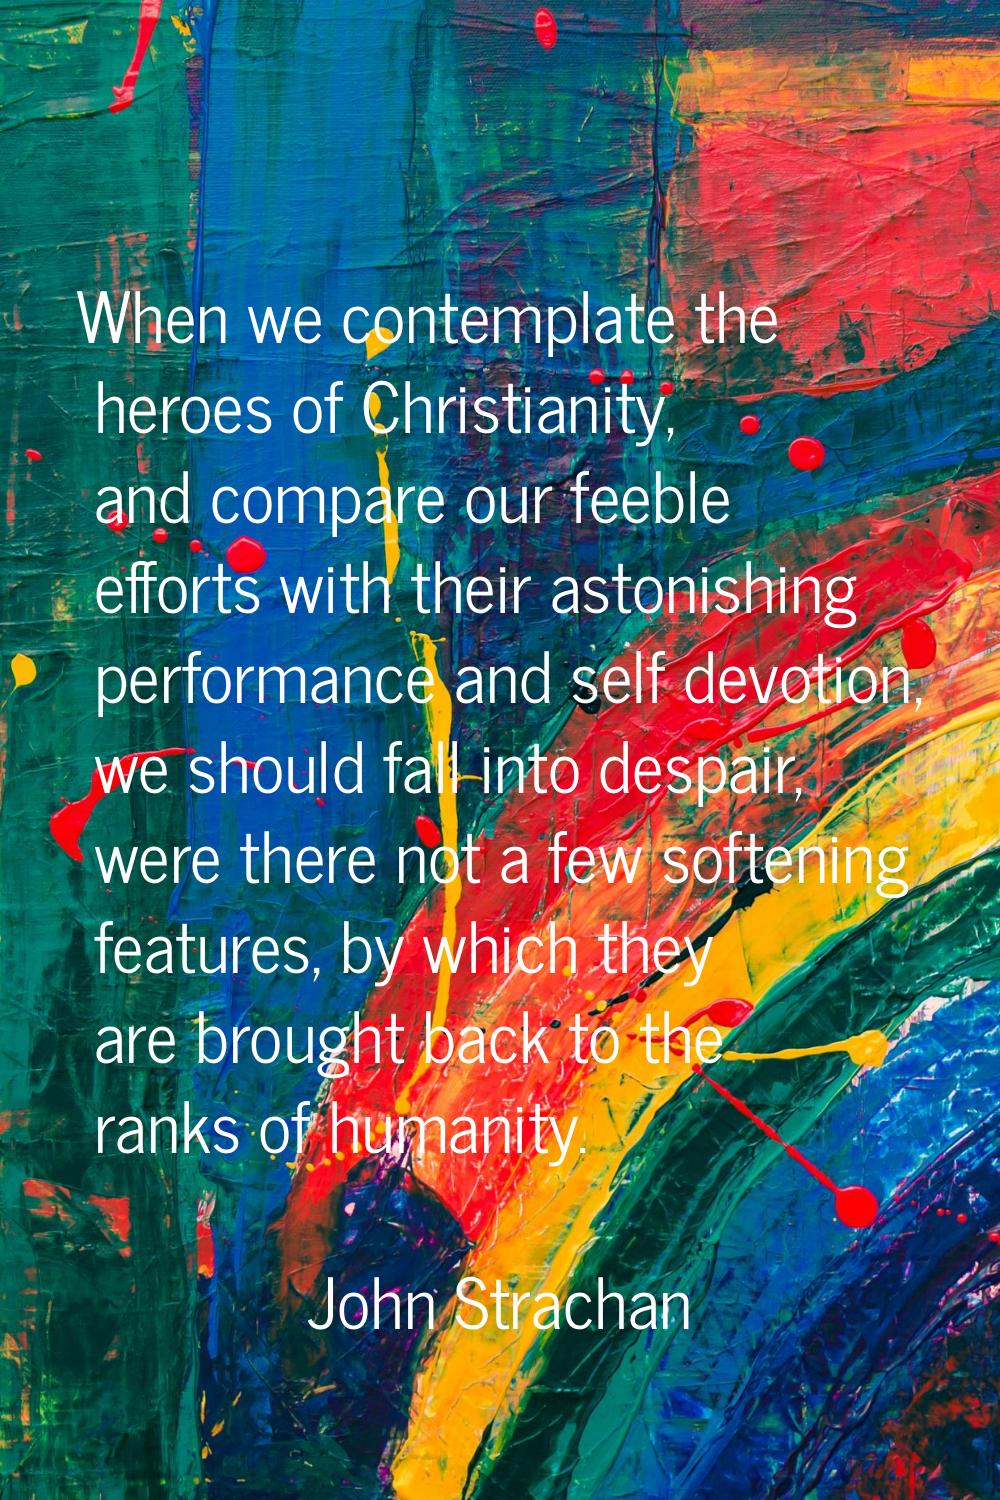 When we contemplate the heroes of Christianity, and compare our feeble efforts with their astonishi